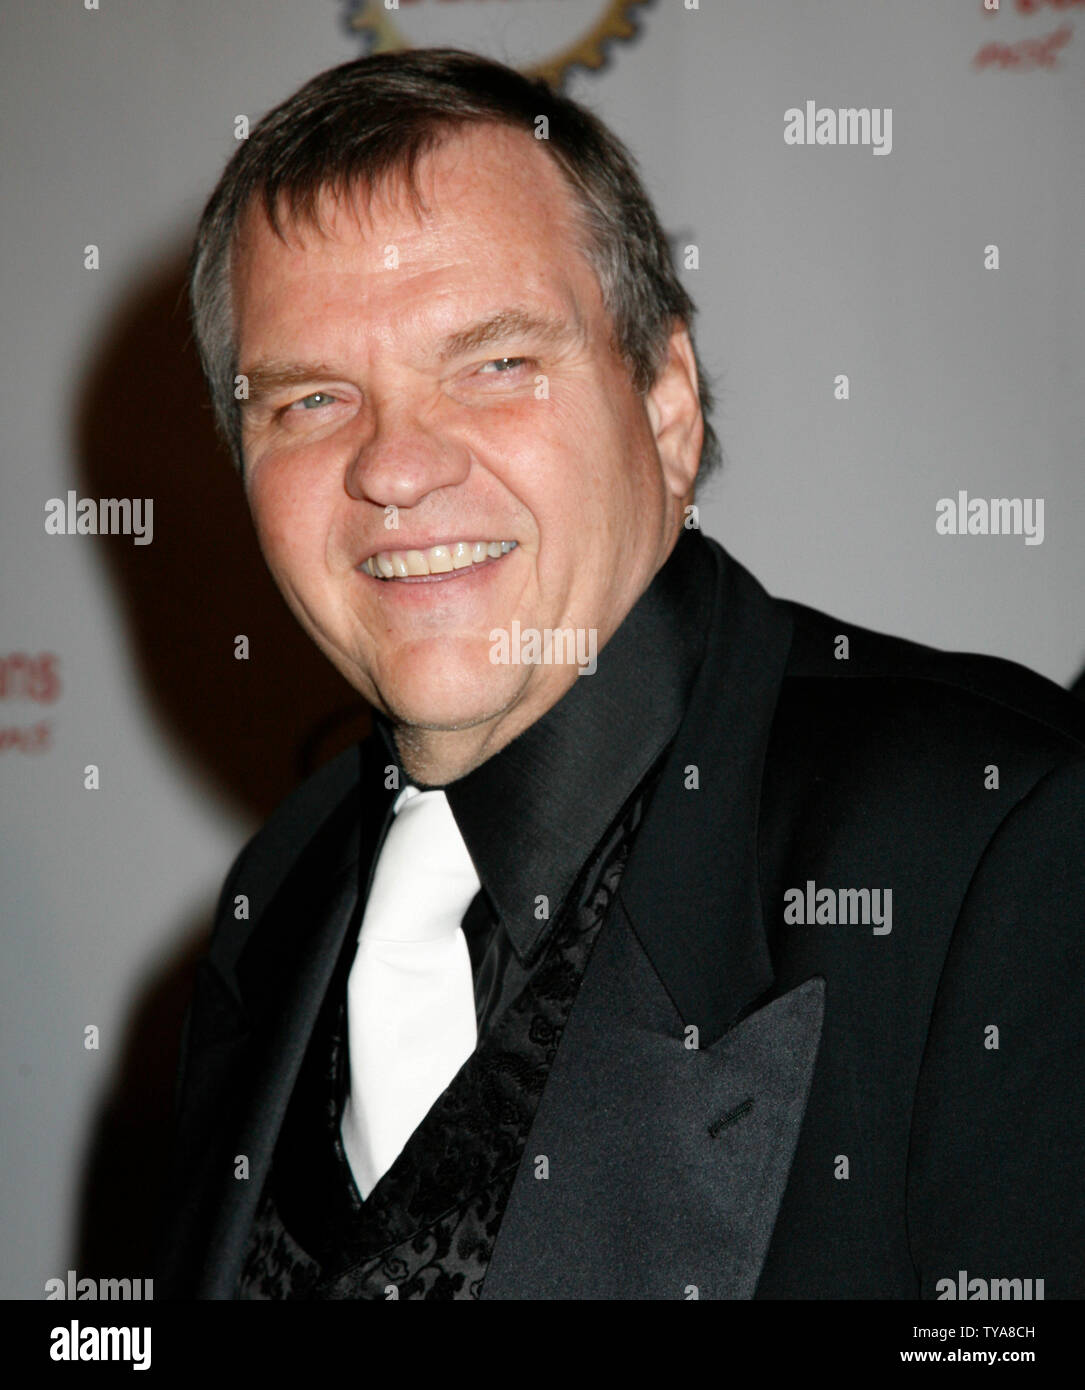 Singer Meatloaf arrives on the red carpet at the 18th annual Night of 100 Stars Oscar viewing party at the Beverly Hills Hotel in Beverly Hills, California on February 24, 2008.   (UPI Photo/David Silpa) Stock Photo